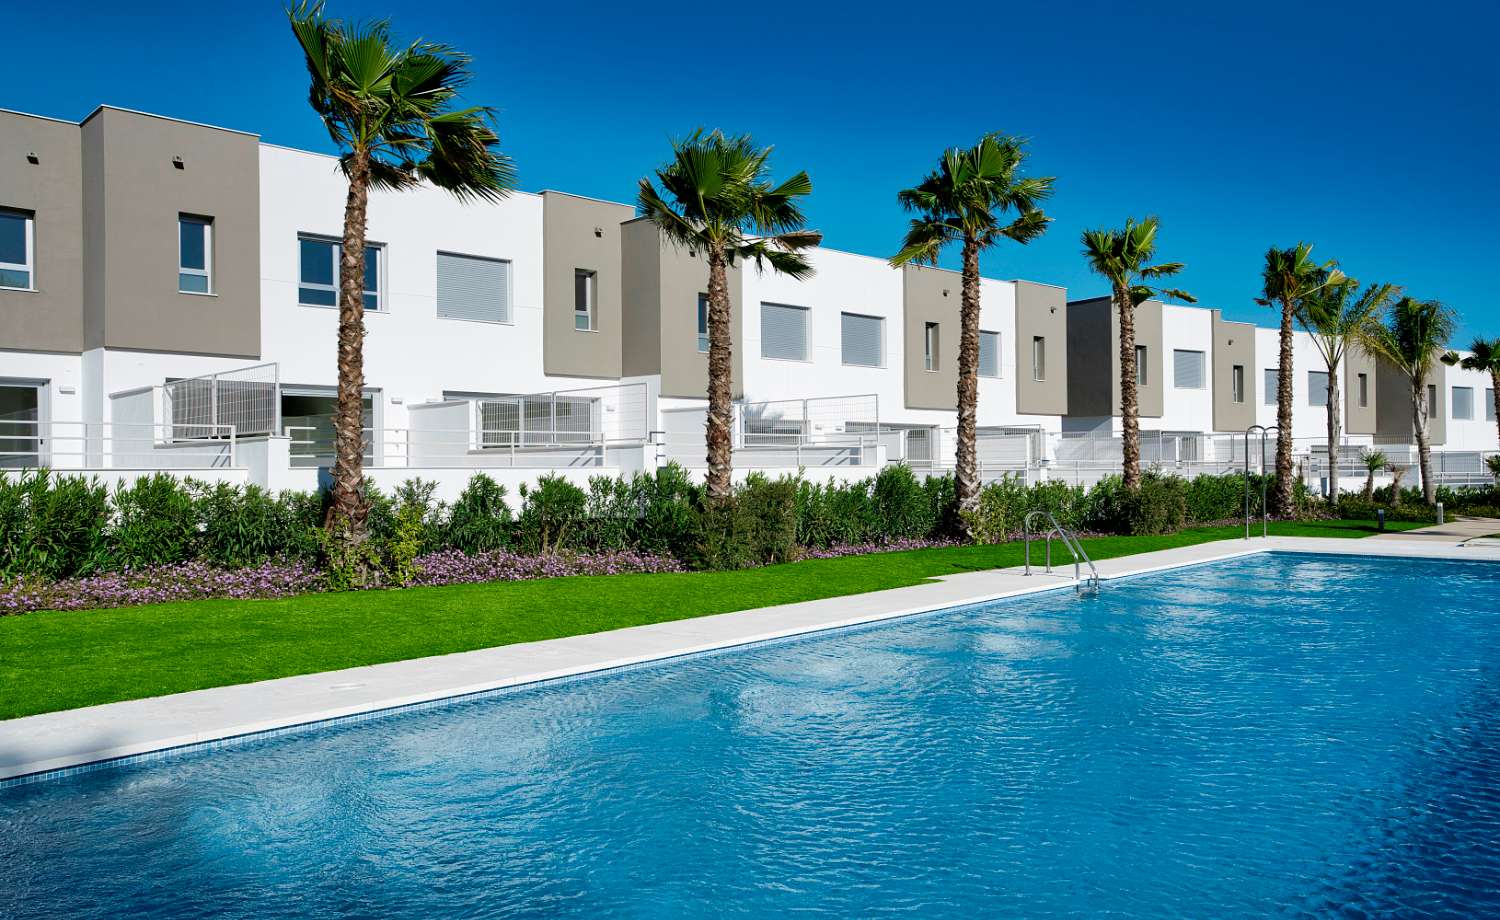 NEW CONSTRUCTION TOWNHOUSES FOR SALE IN ESTEPONA GOLF, COSTA DEL SOL